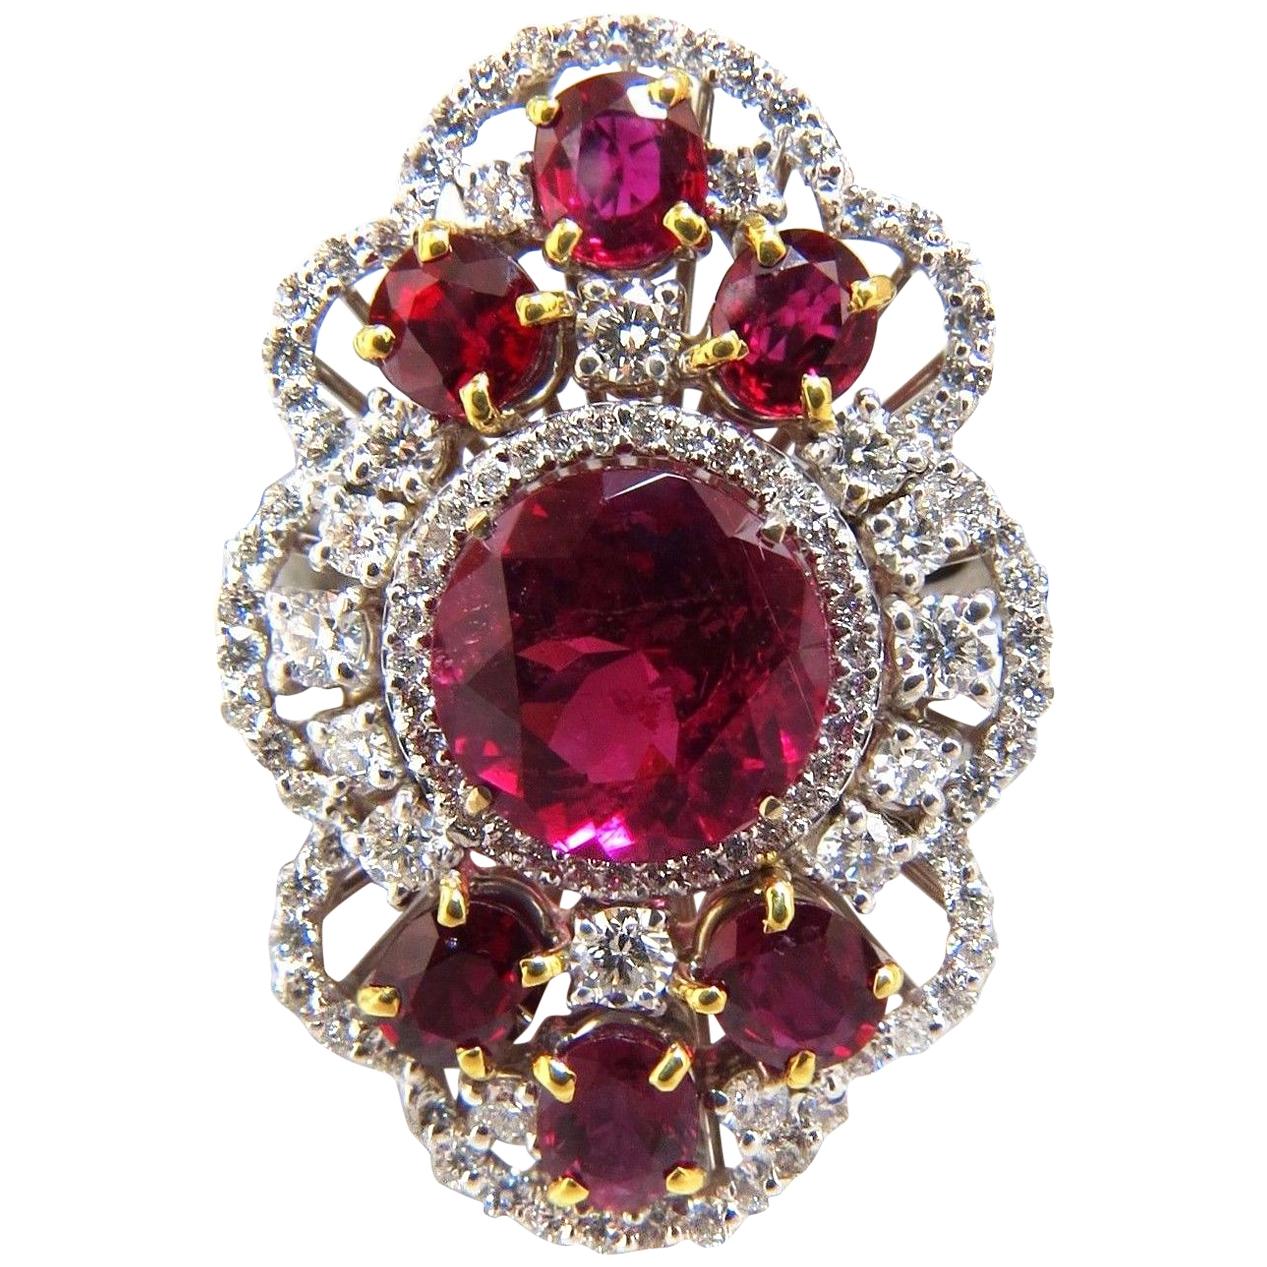 GIA Certified 8.03CT Natural Tourmaline Rubellite Ruby Diamond Cluster Ring 18K For Sale